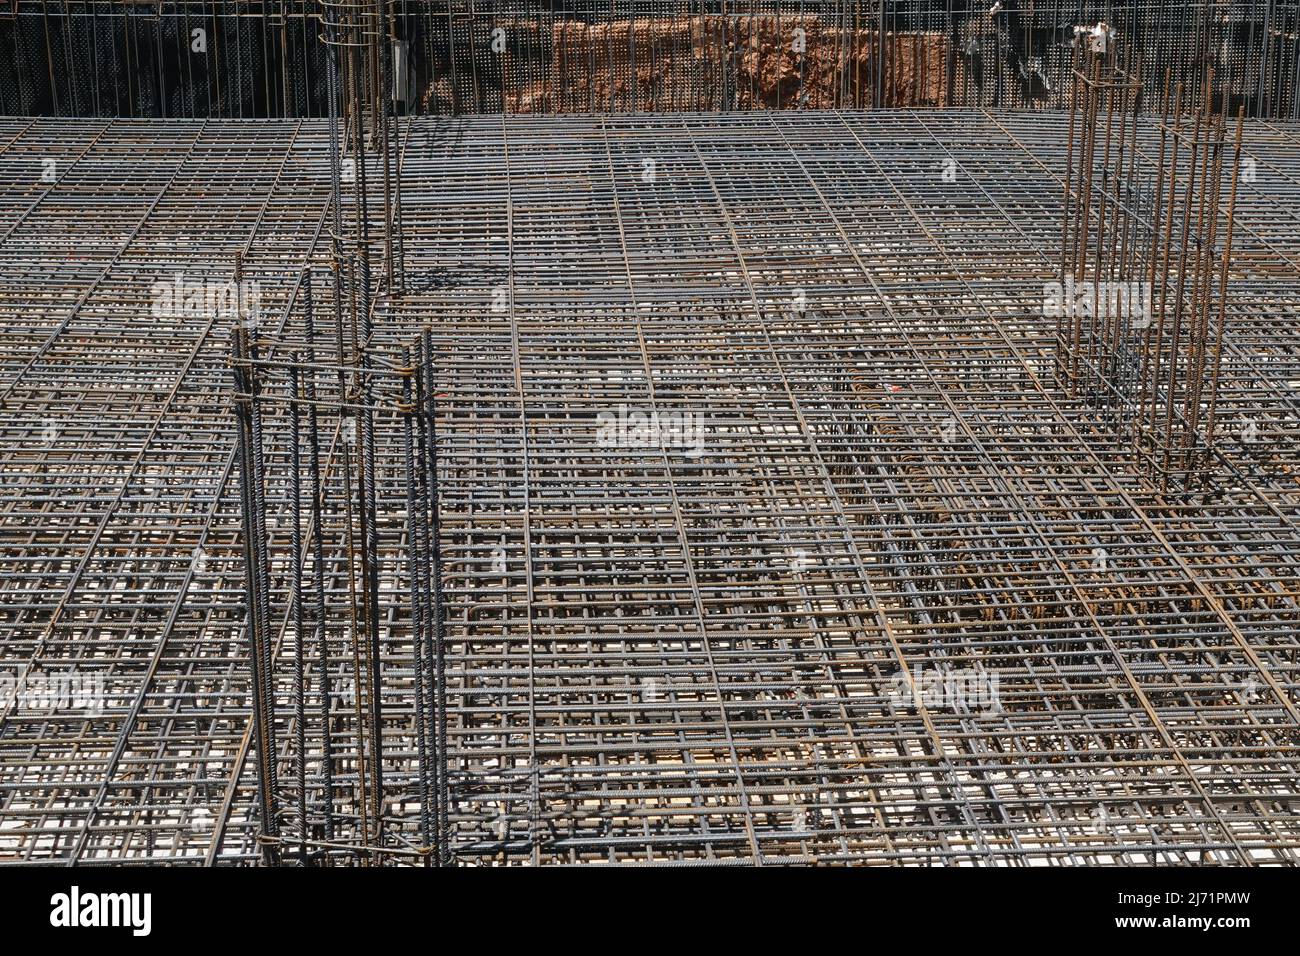 Building foundation with steel reinforcement bars at construction site. Stock Photo